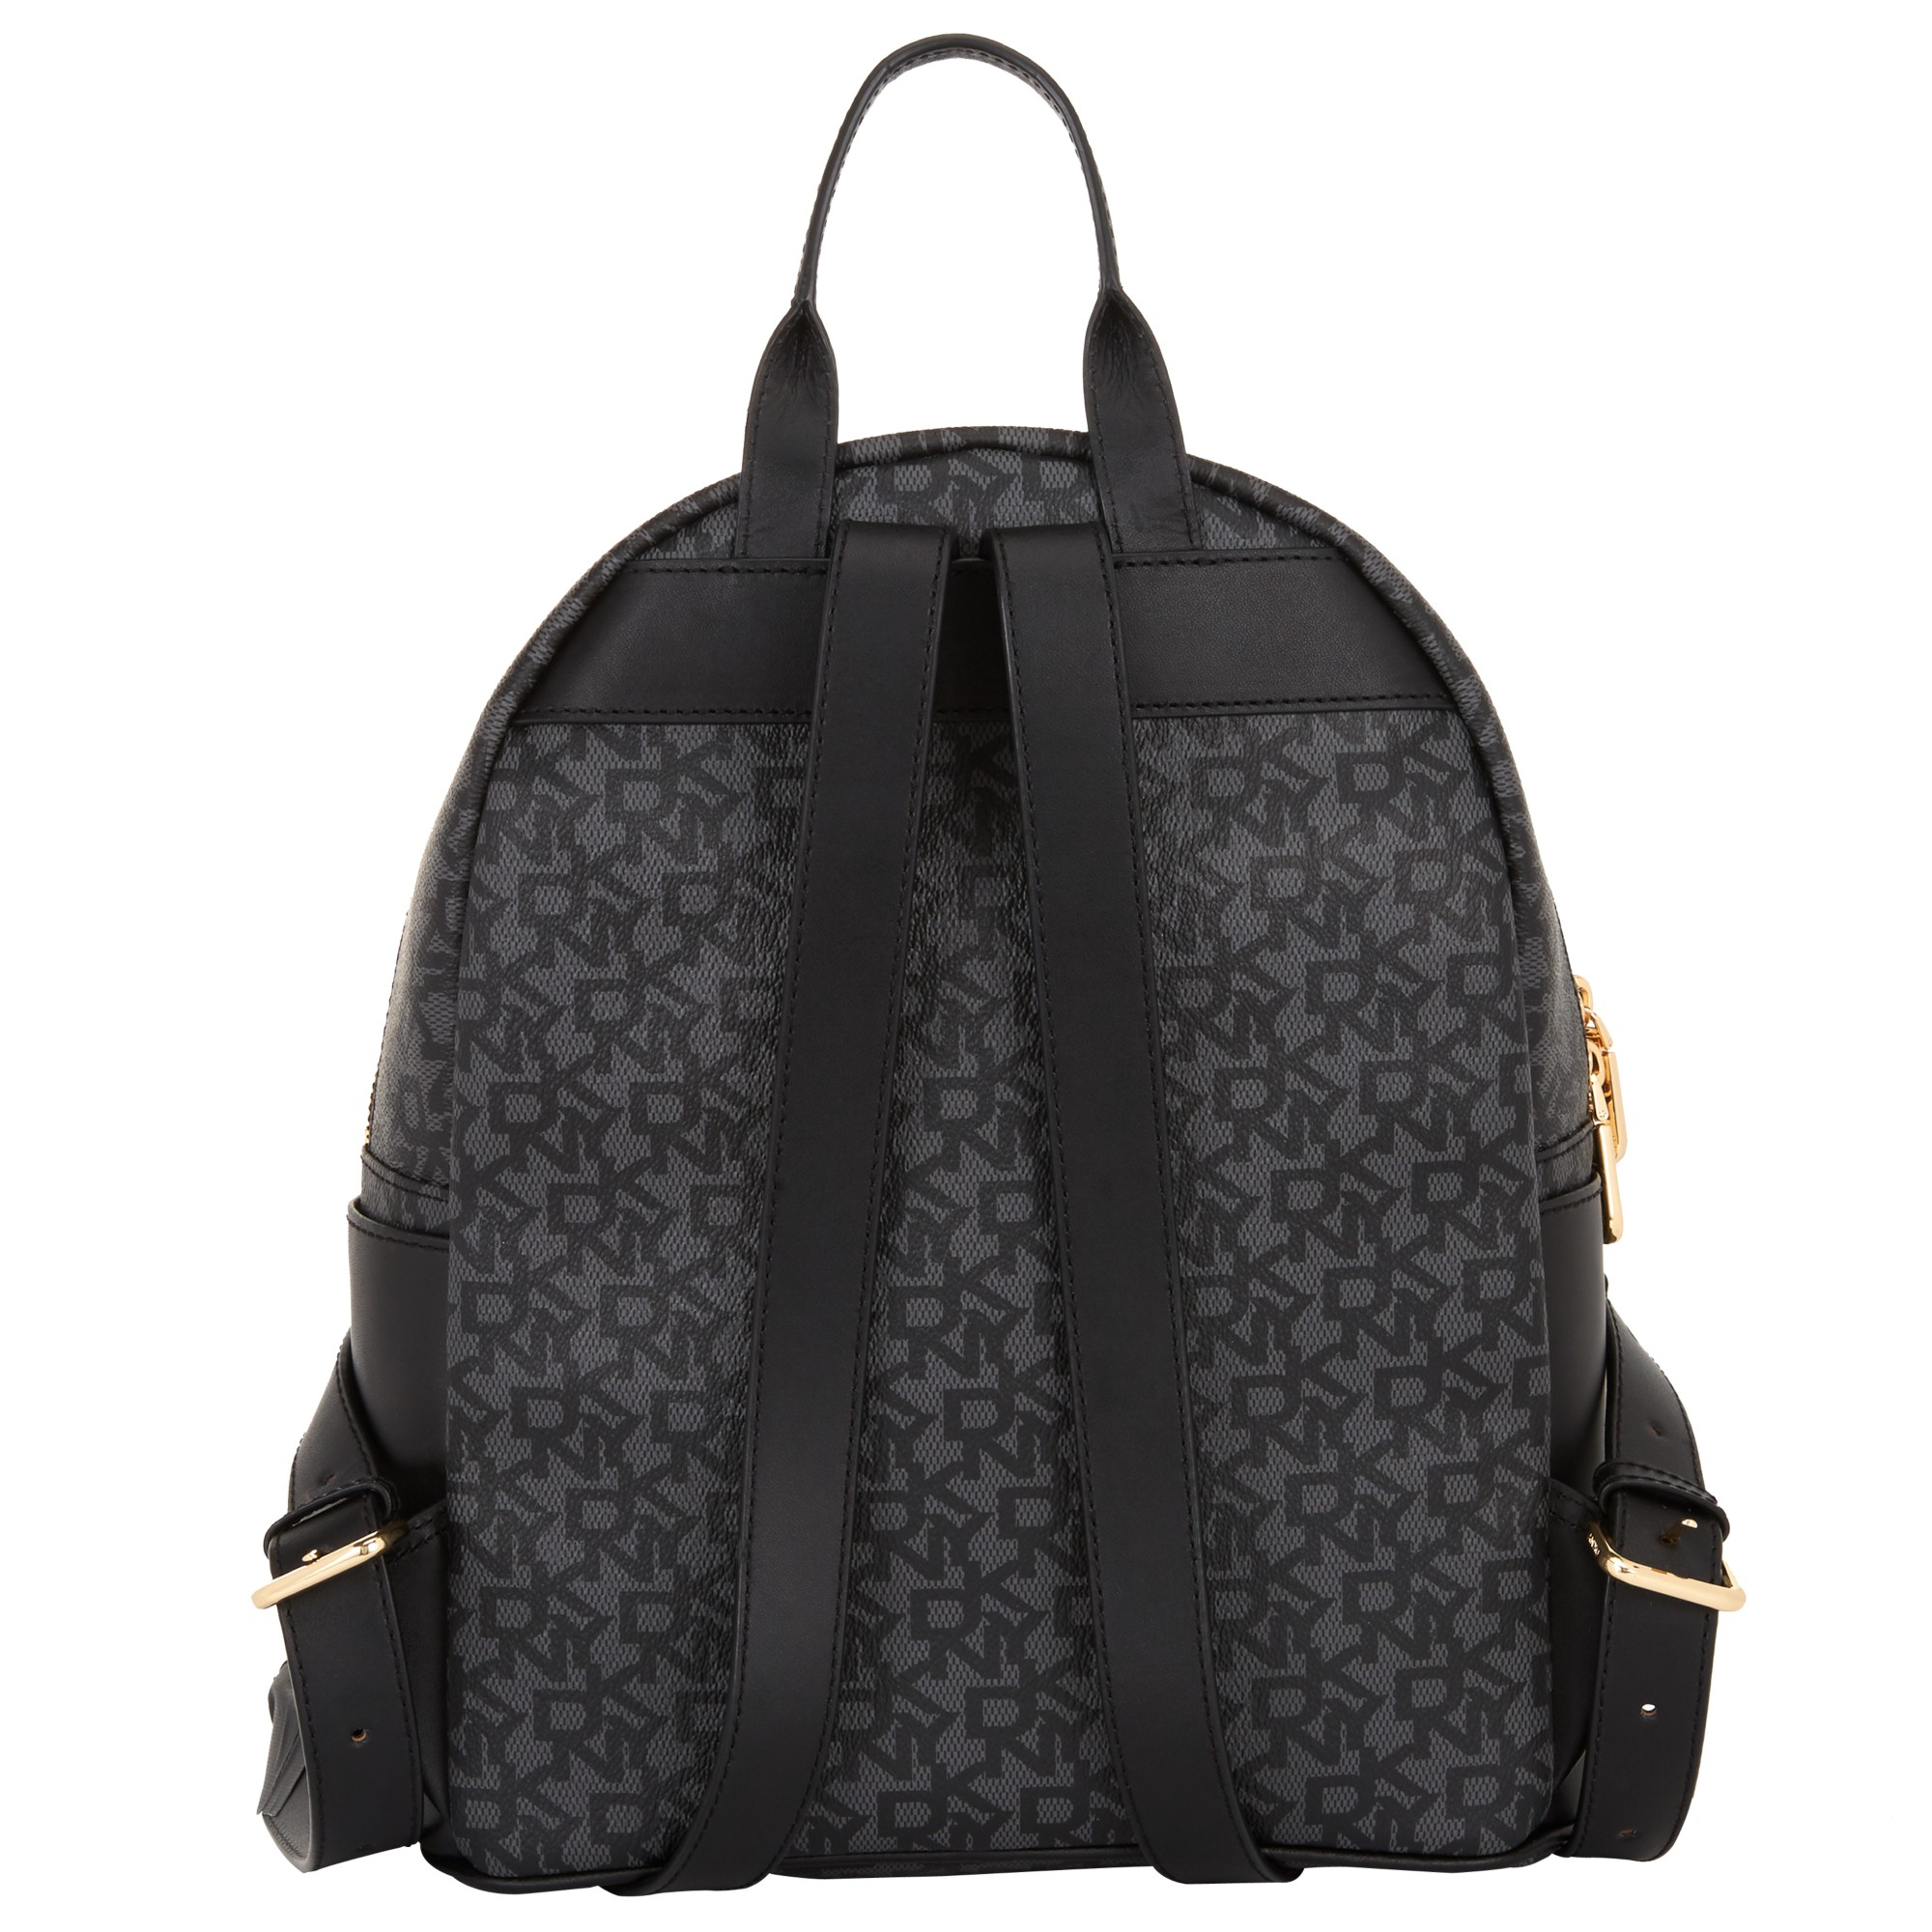 DKNY Heritage Coated Leather Logo Backpack in Black - Lyst